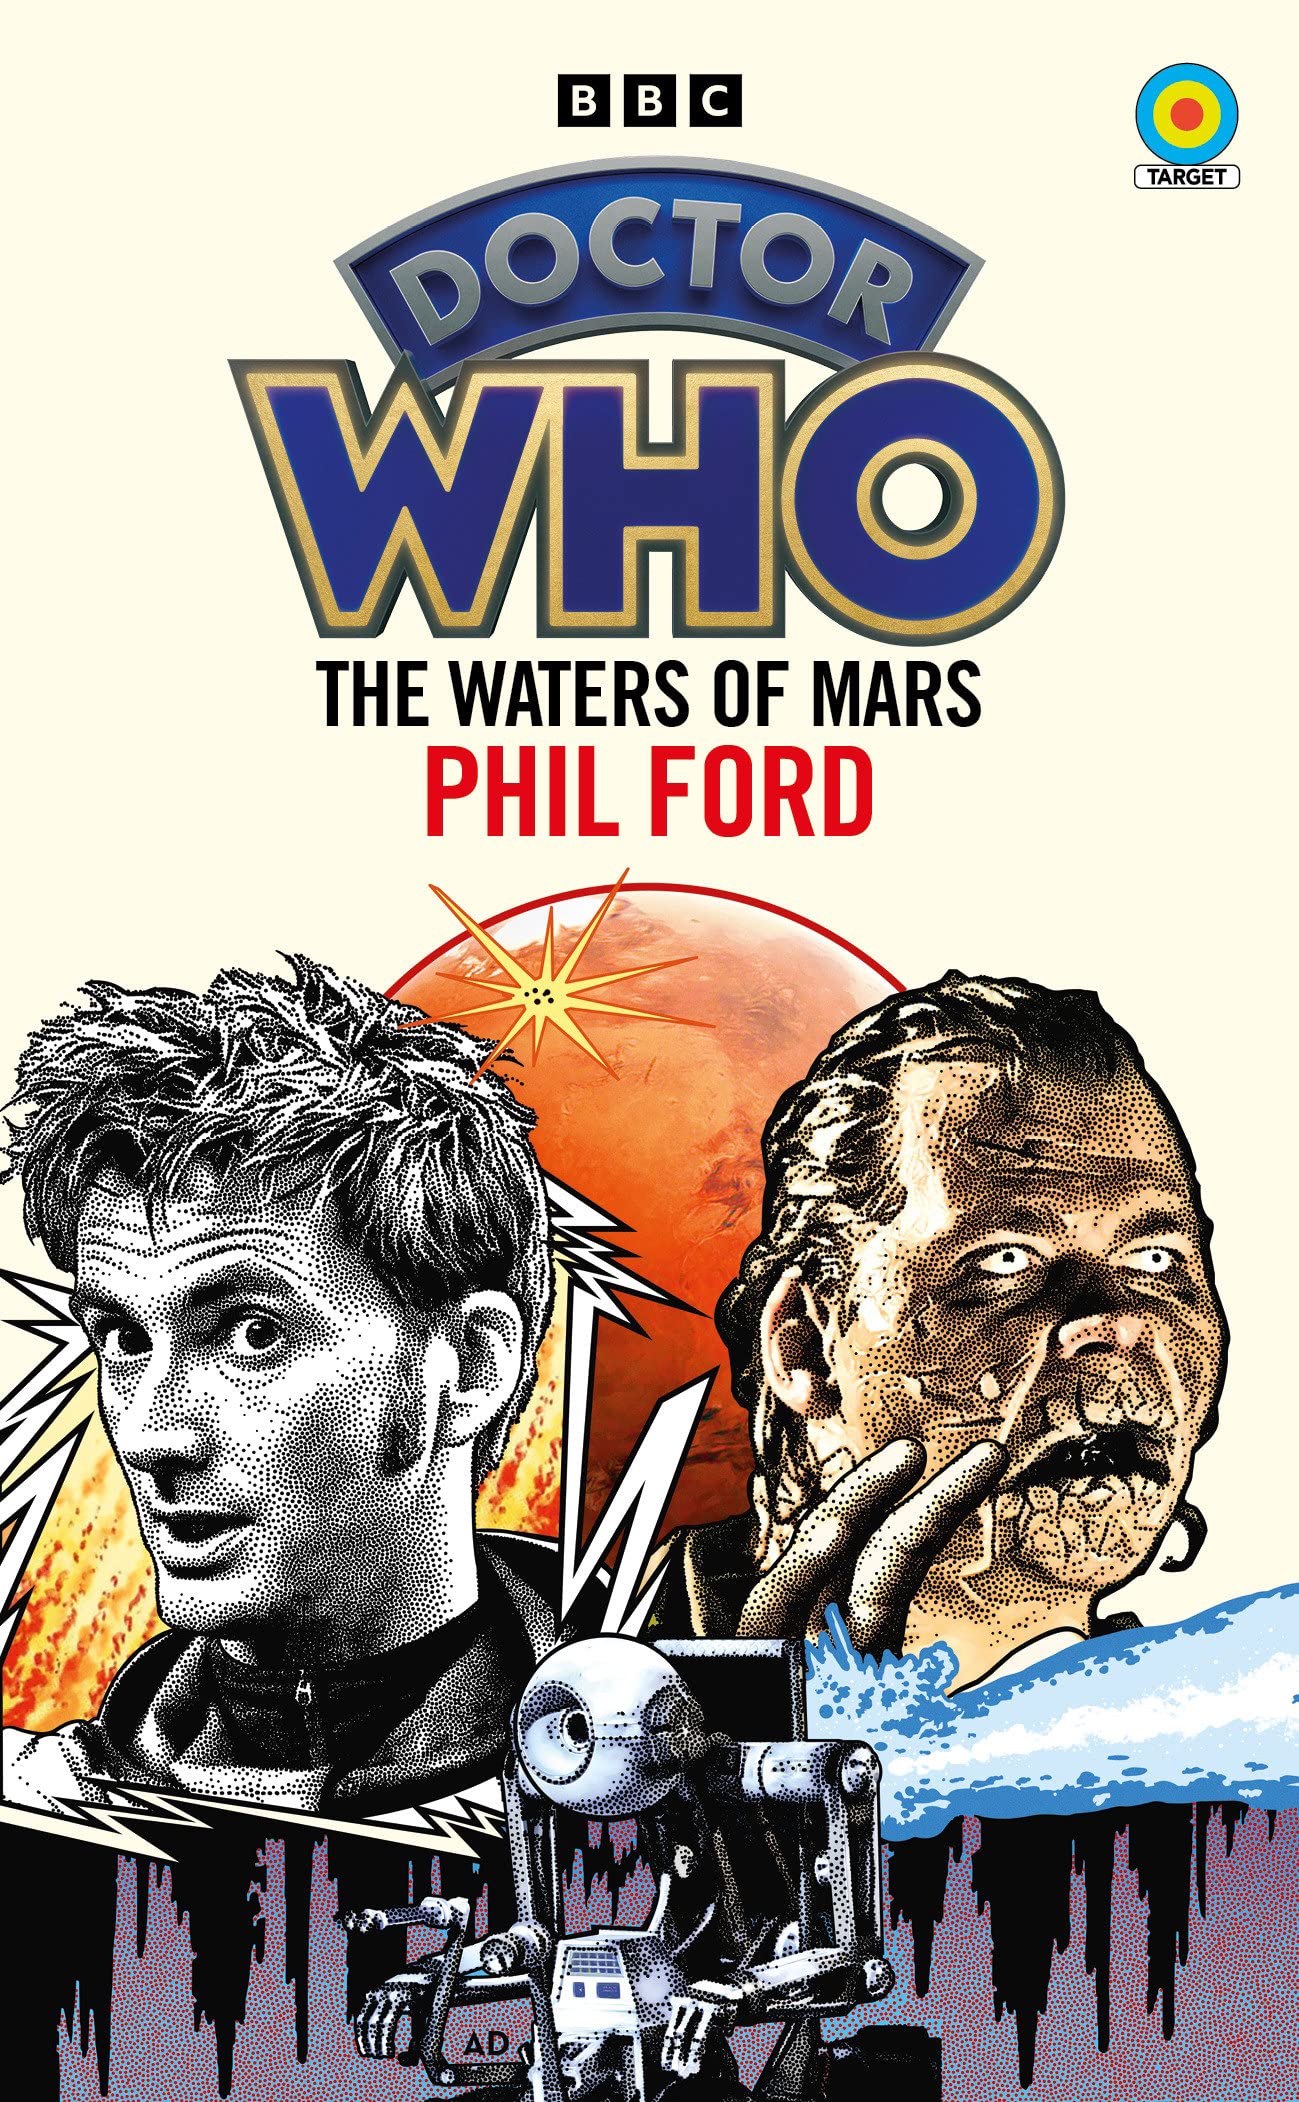 DOCTOR WHO - THE WATERS OF MARS